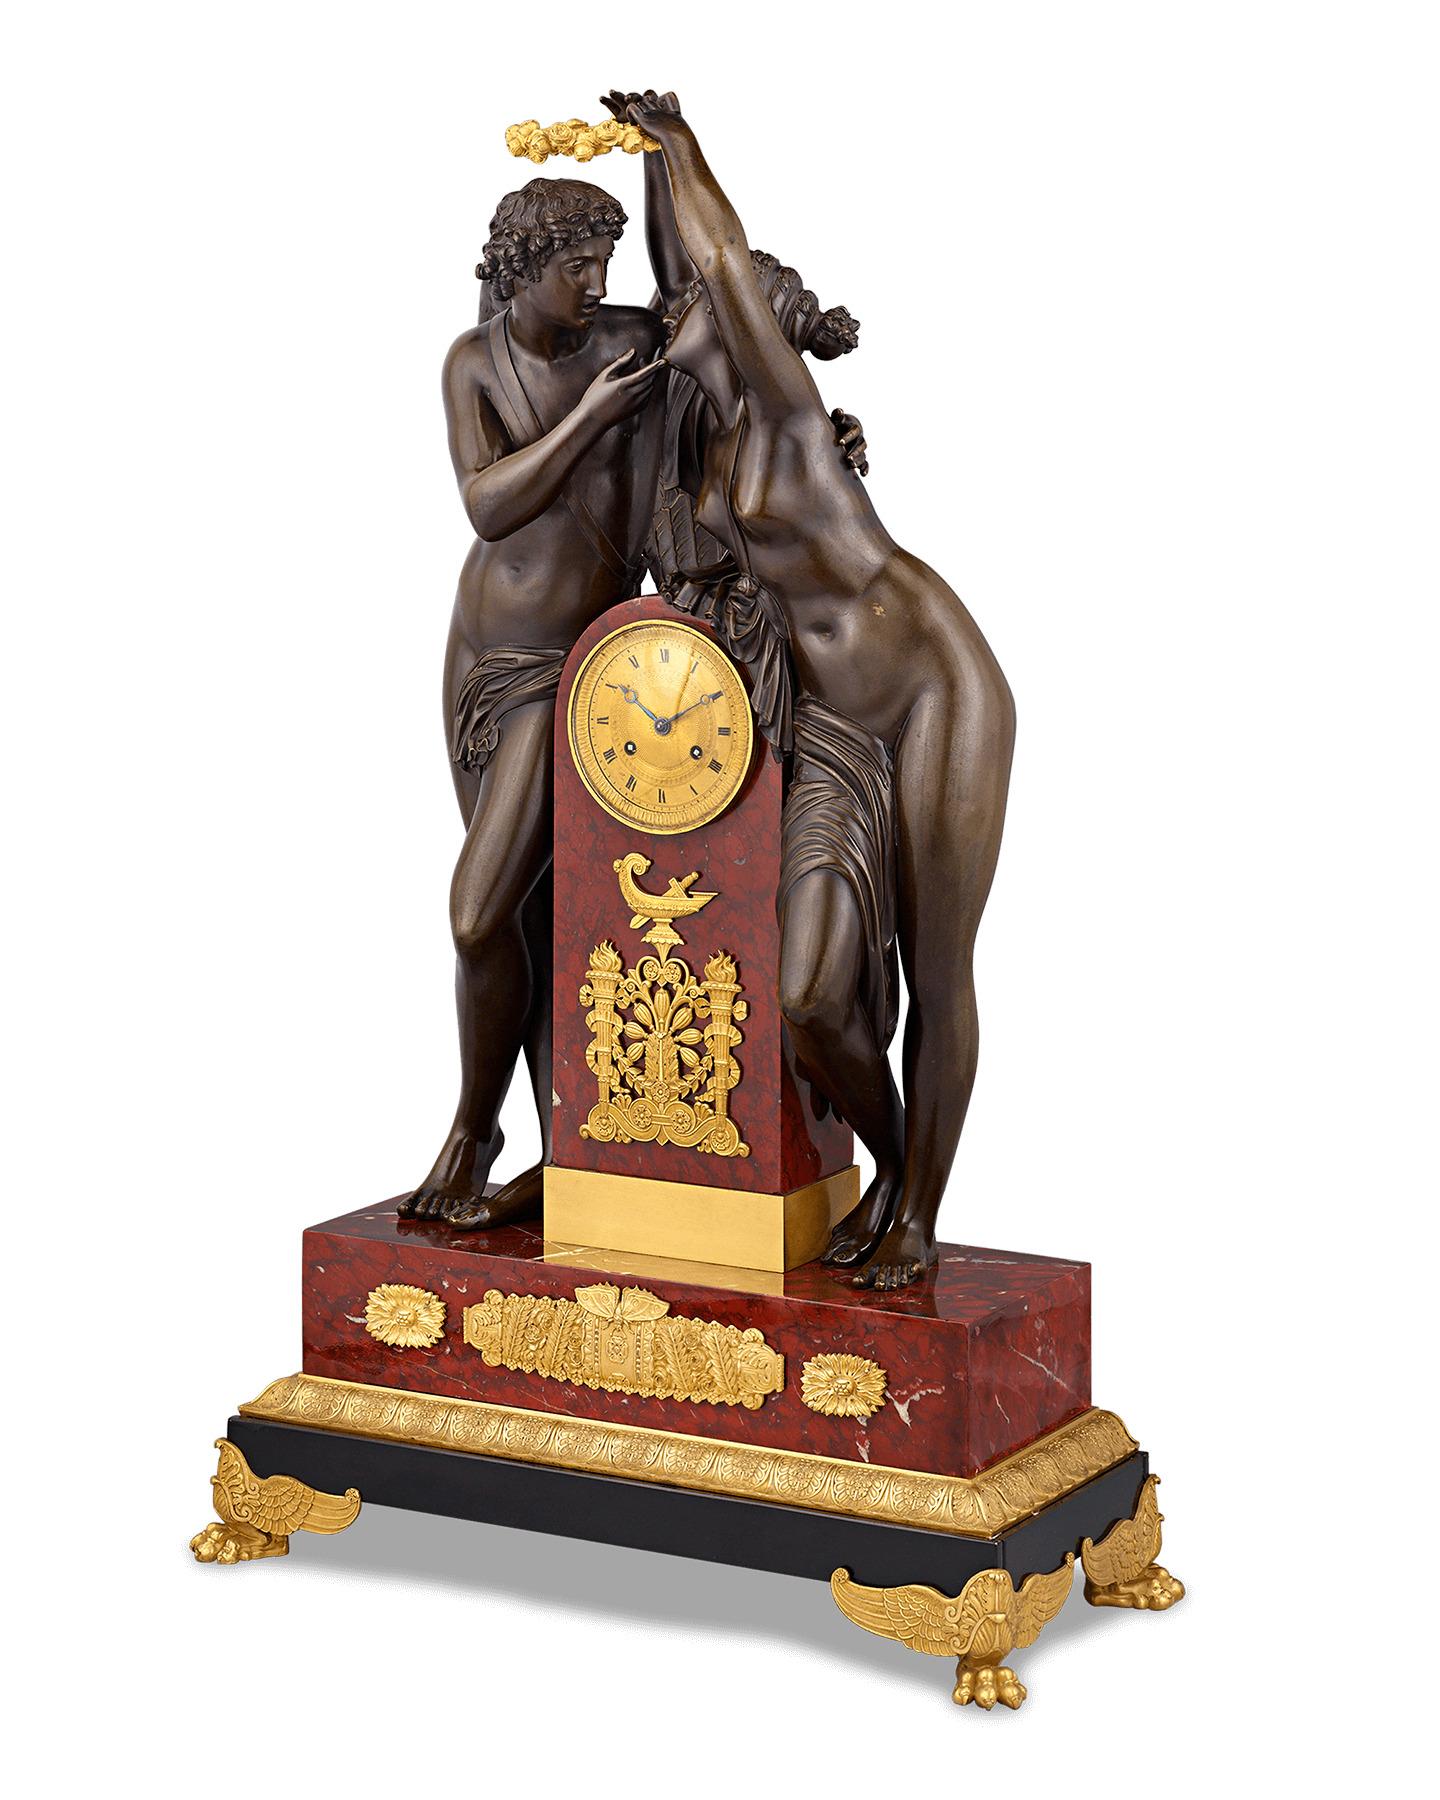 This exceptional French Empire-style mantel clock was created after a model by the famed French sculptor Claude Michallon. The gilt and patinated bronze design captures one of the most legendary love stories in history — the mythological tale of